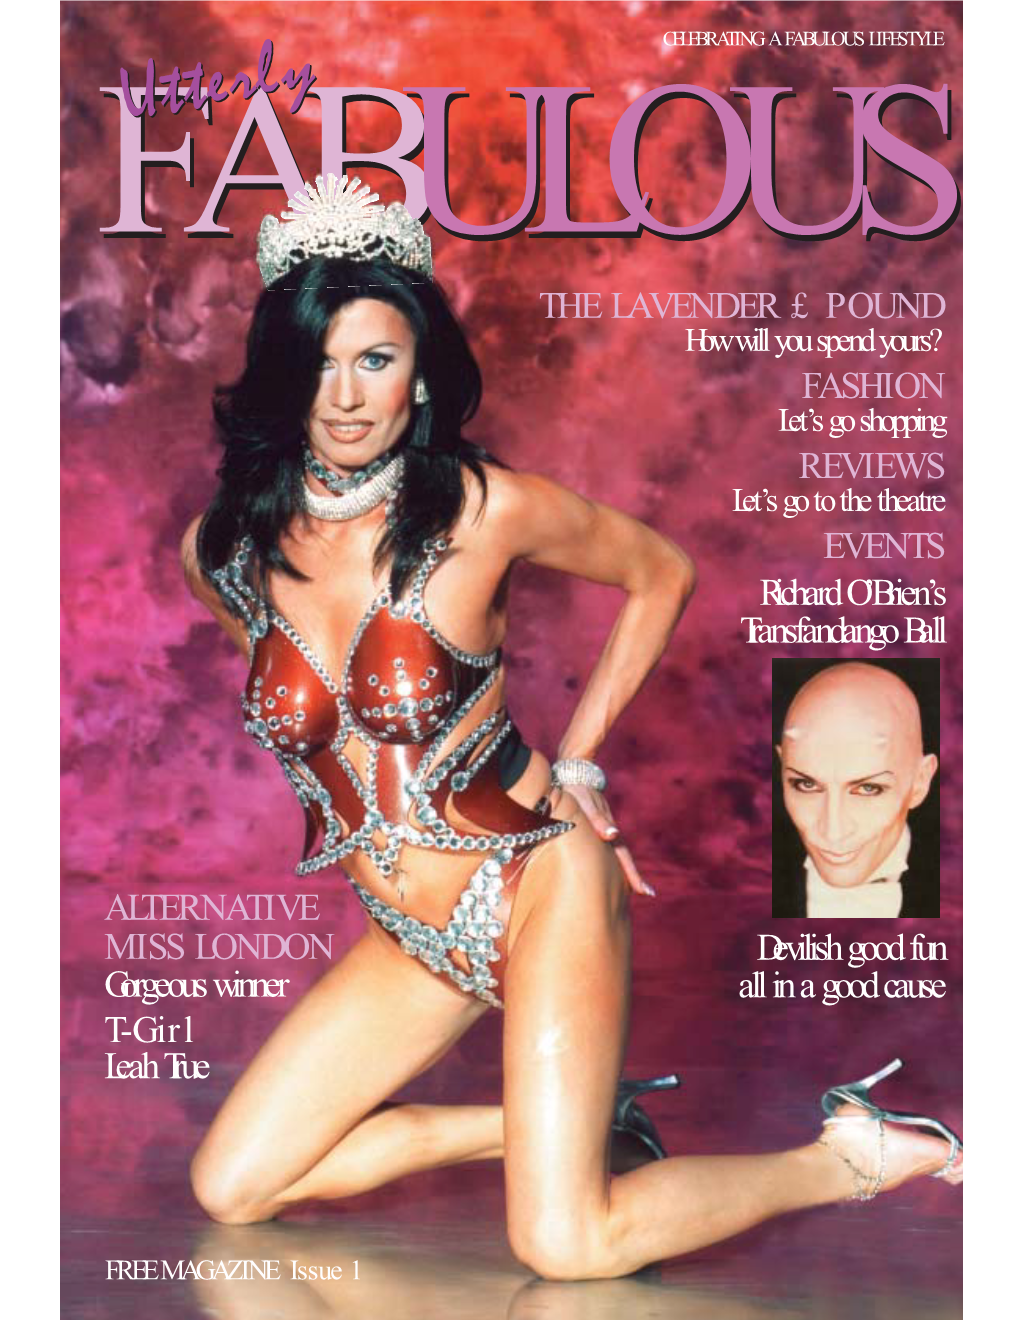 Issue 1 2 Utterlyfabulous NEWS - by Vicky Lee